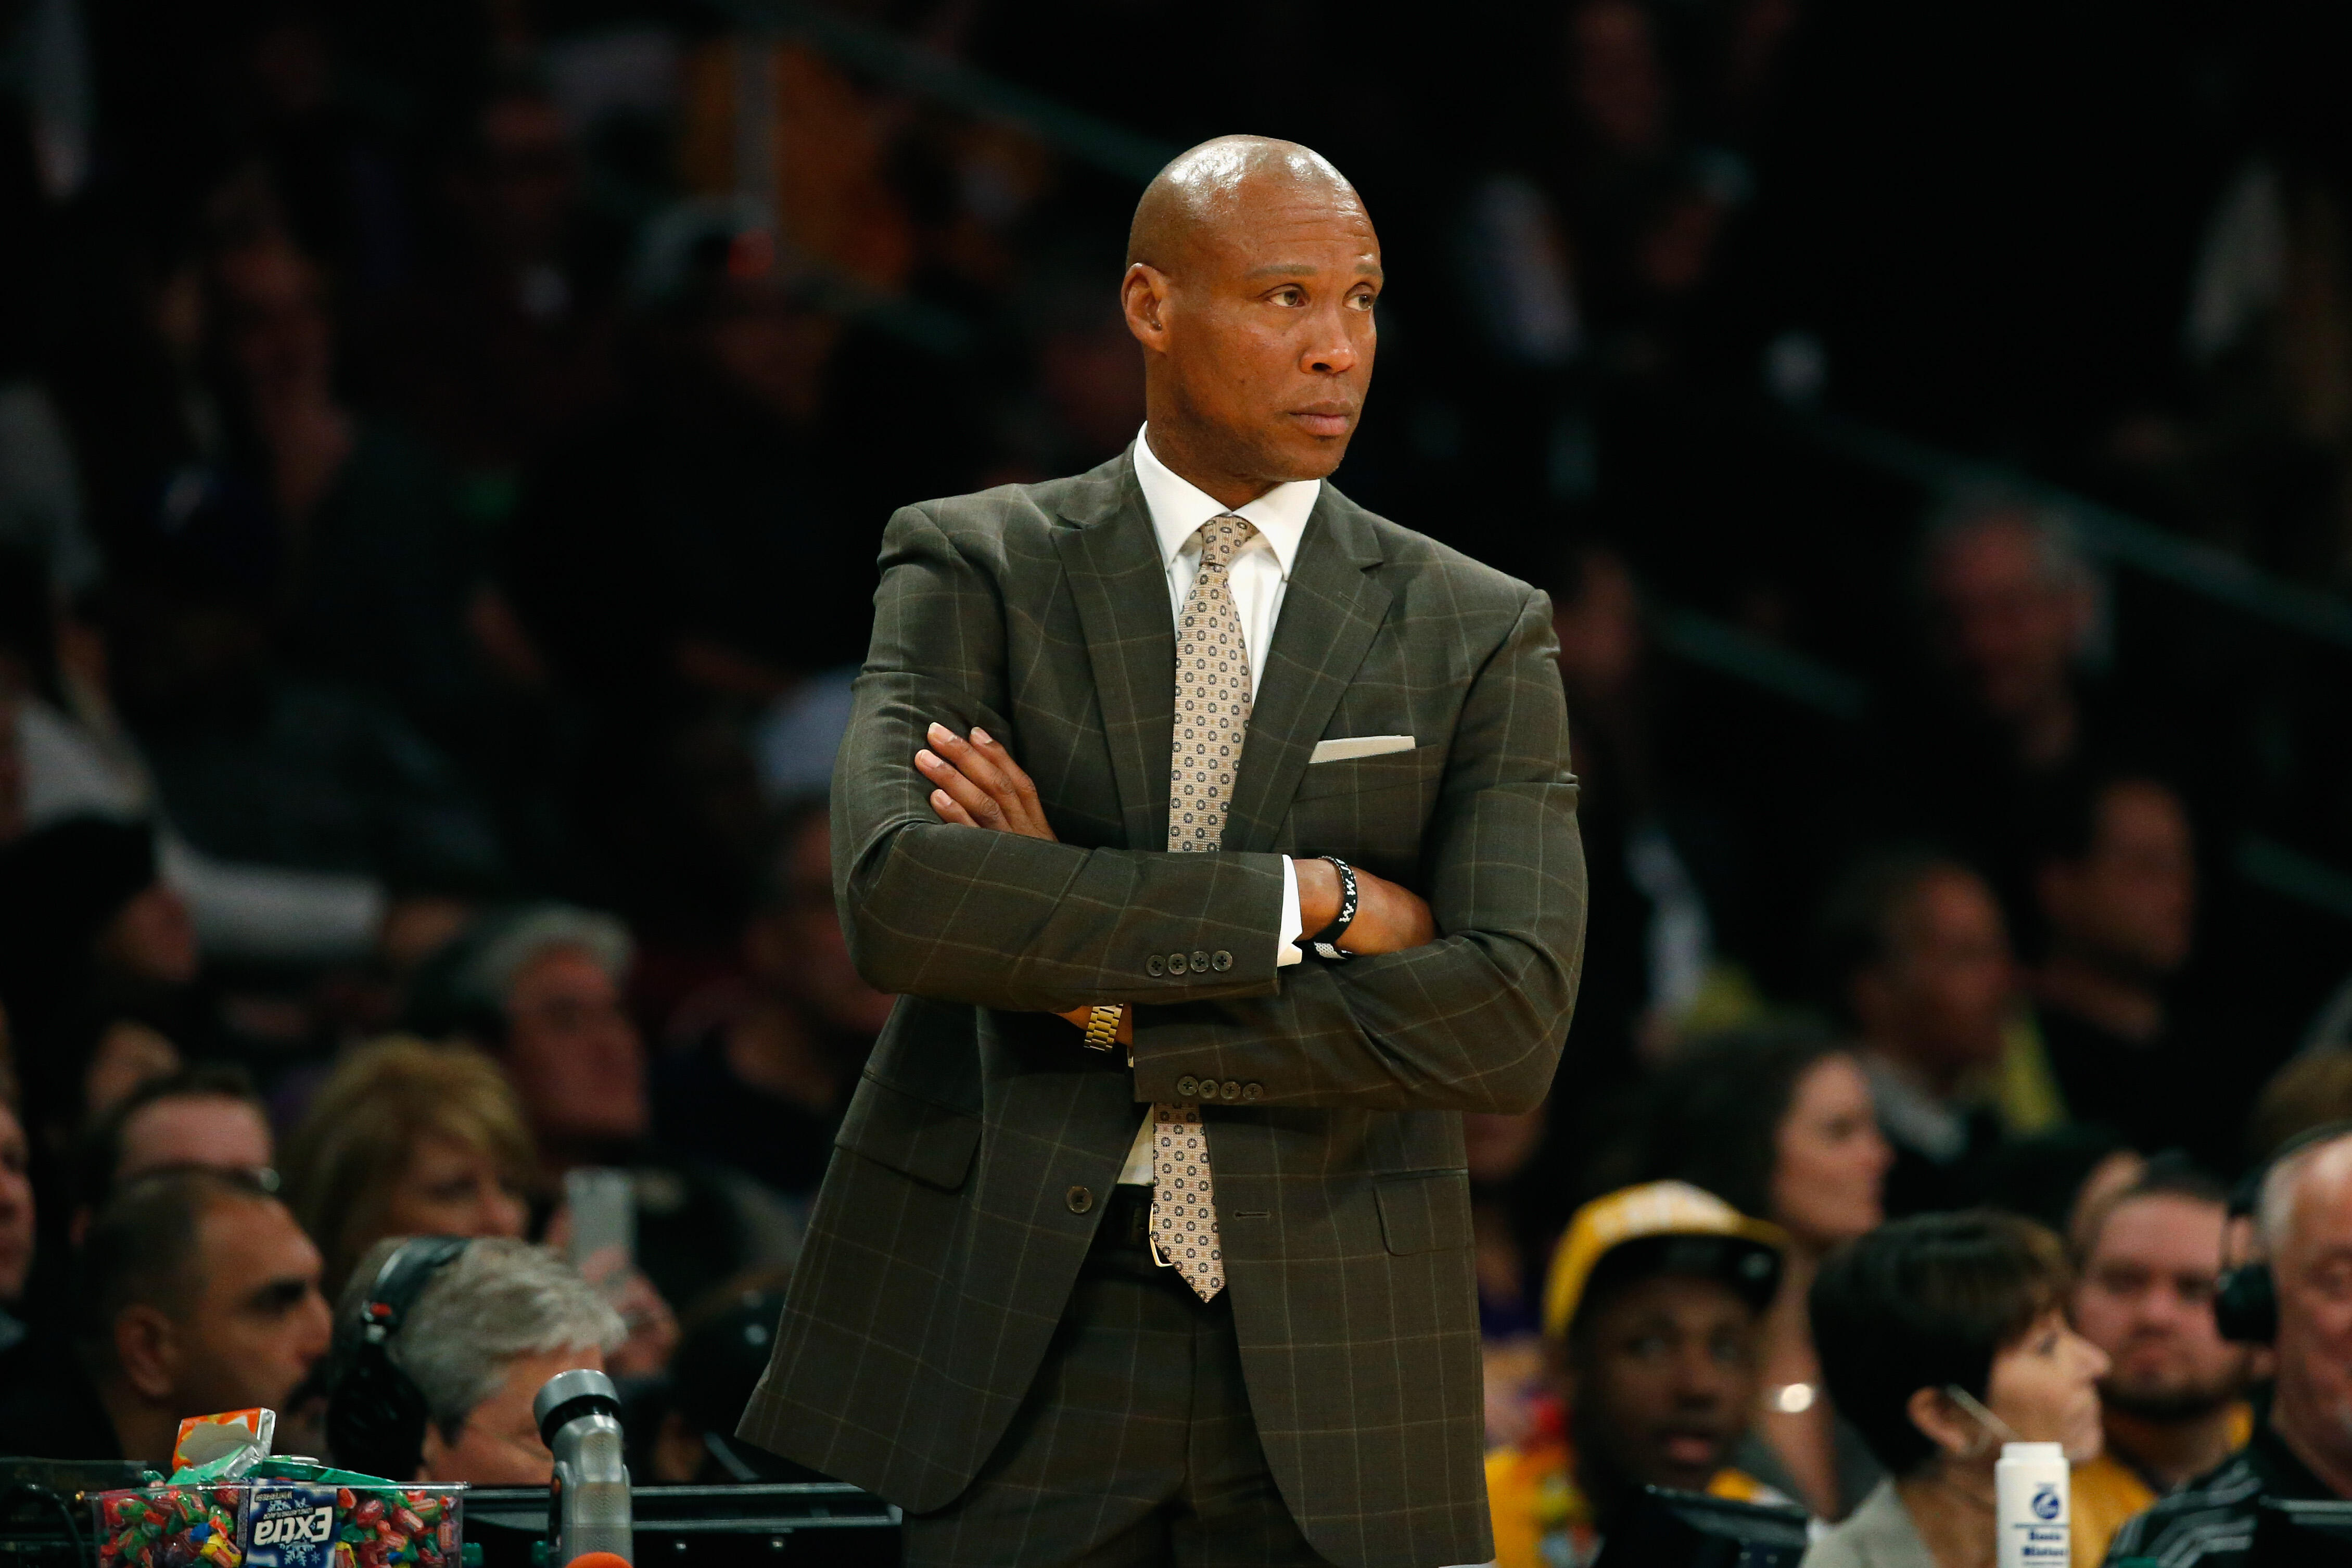 LOS ANGELES, CA - DECEMBER 15:  Byron Scott head coach of the Los Angeles Lakers looks on during the first half of a game against the Milwaukee Bucks  at Staples Center on December 15, 2015 in Los Angeles, California.  NOTE TO USER: User expressly acknowl